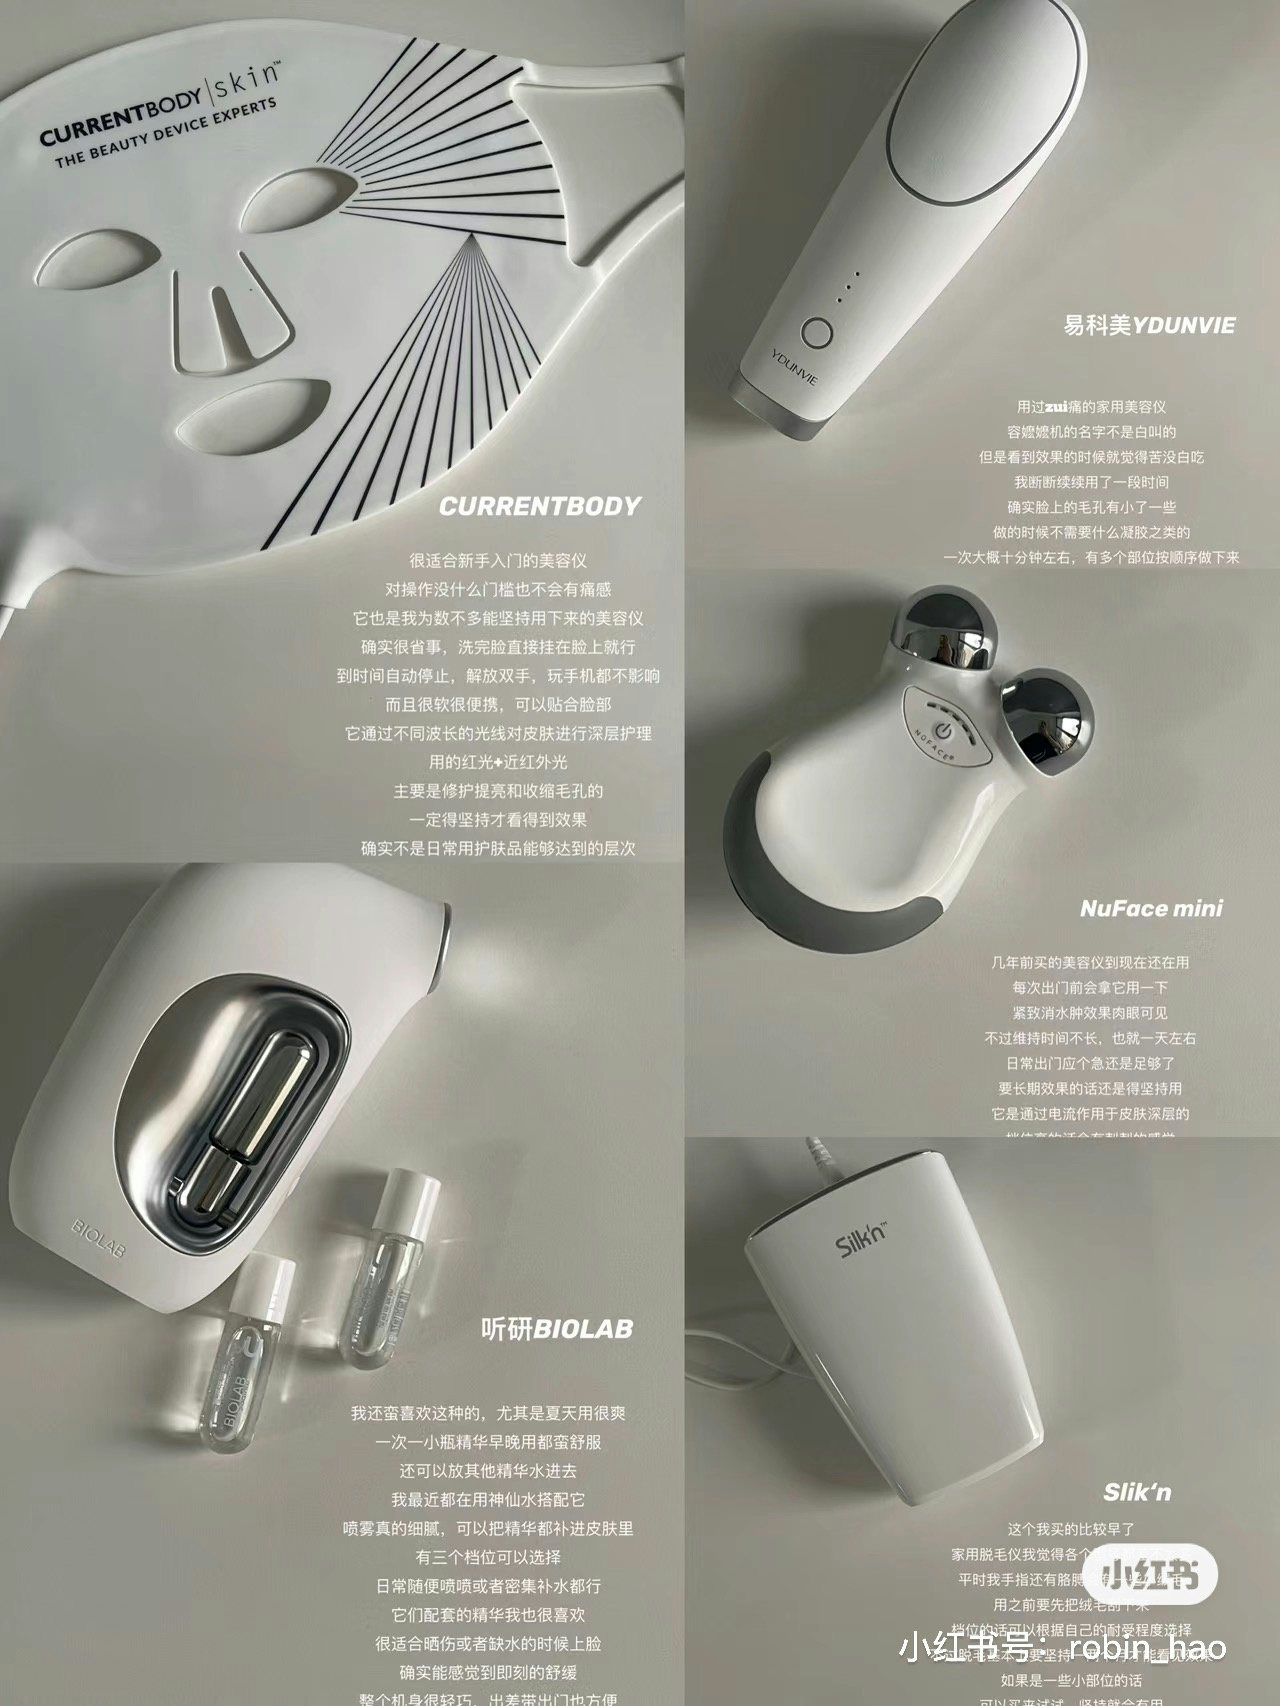 As we enter the third stage of development, comprising technology-led skincare, consumers are realizing the limits of beauty ingredients and turning to tech devices to maximize the efficacy of their skincare products. Image: Xiaohongshu